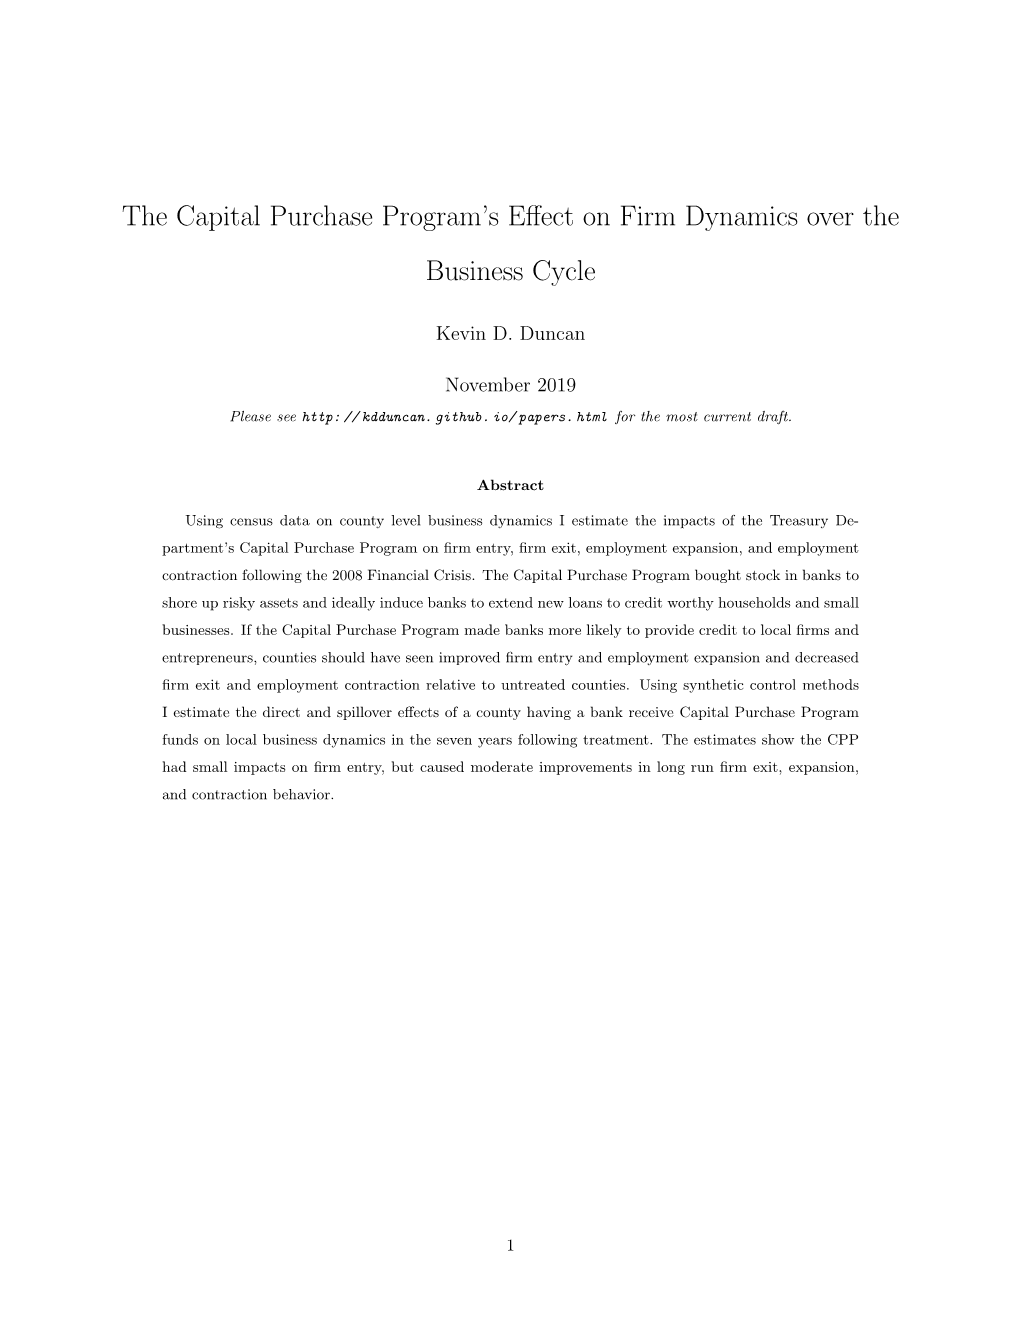 The Capital Purchase Program's Effect on Firm Dynamics Over the Business Cycle